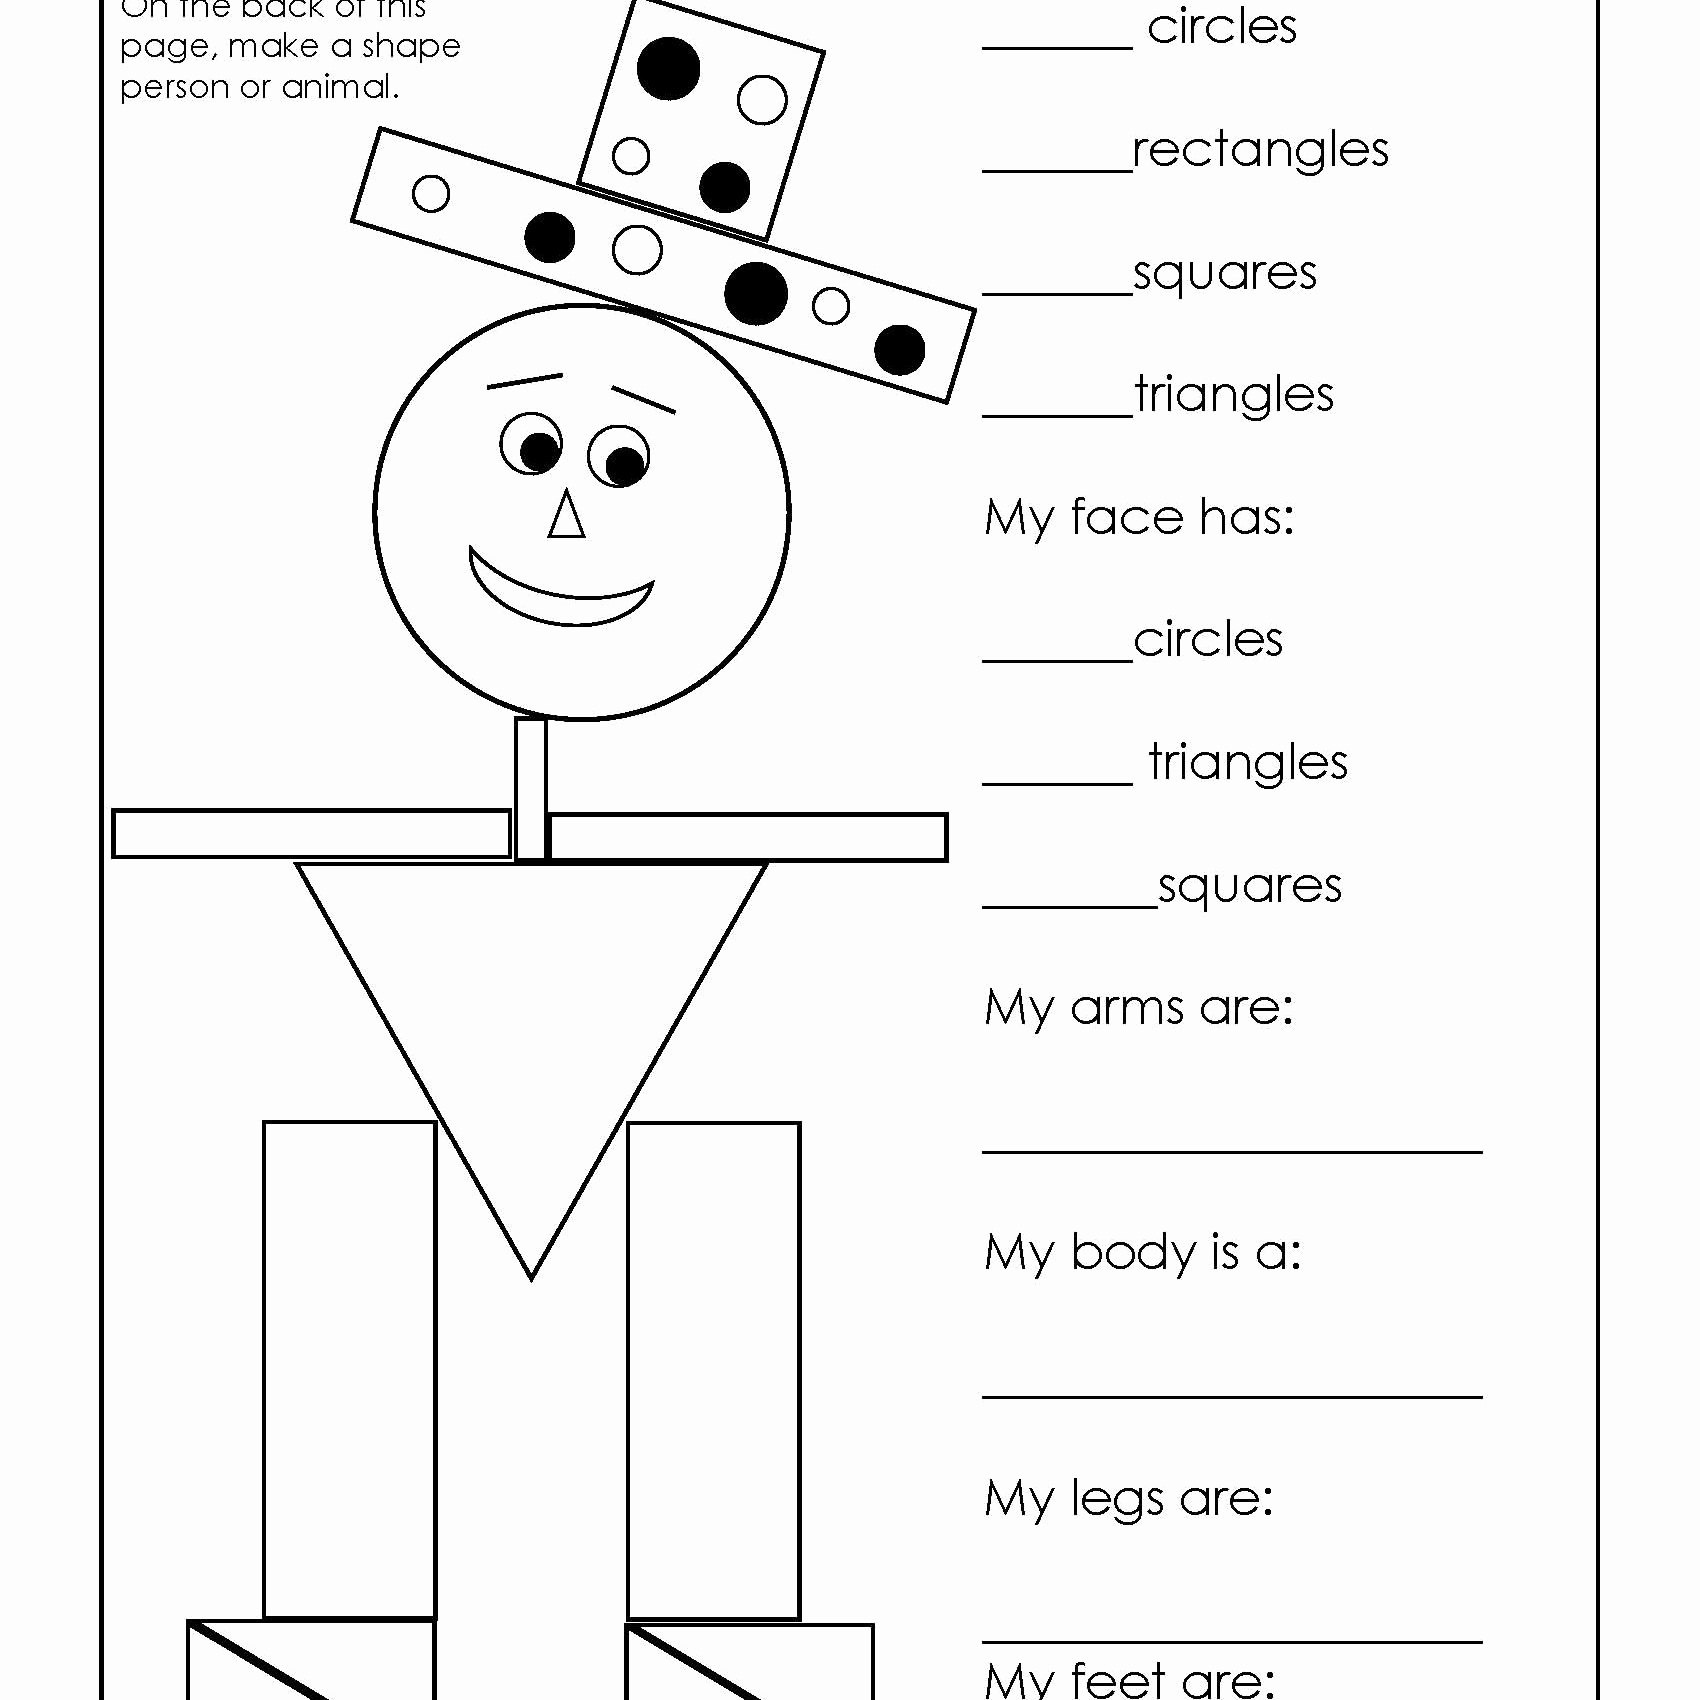 Geometric Shapes Patterns Worksheets Unique Geometry Worksheets for Students In 1st Grade